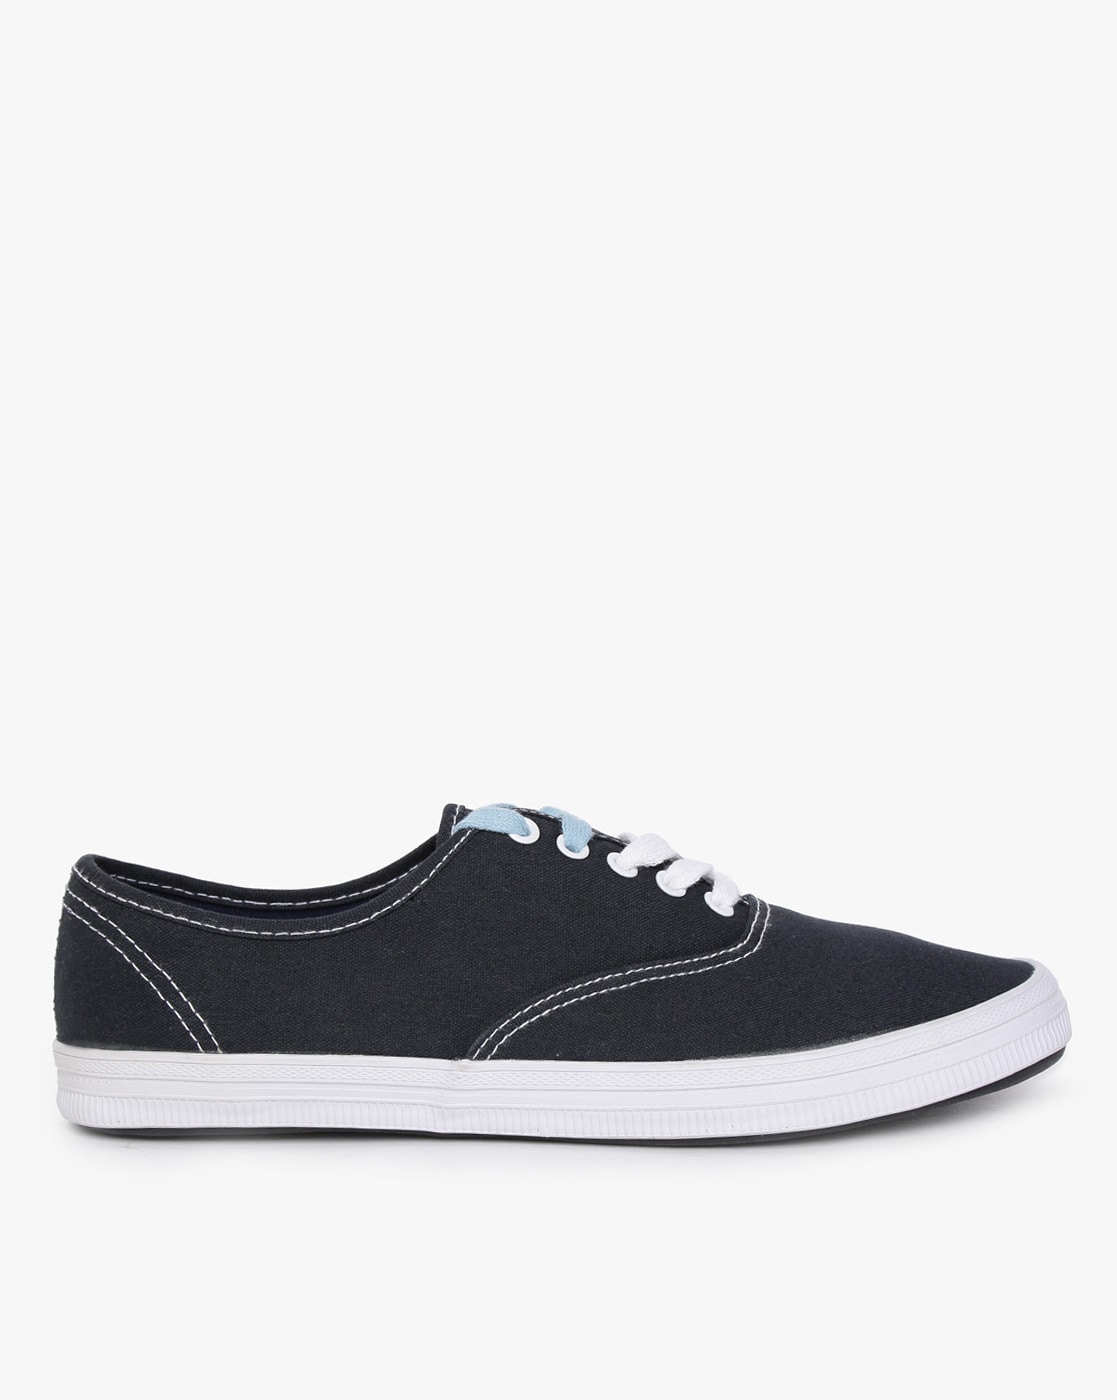 fcity.in - Aadab Attractive Men Sports Shoes / Modern Attractive Men Sports